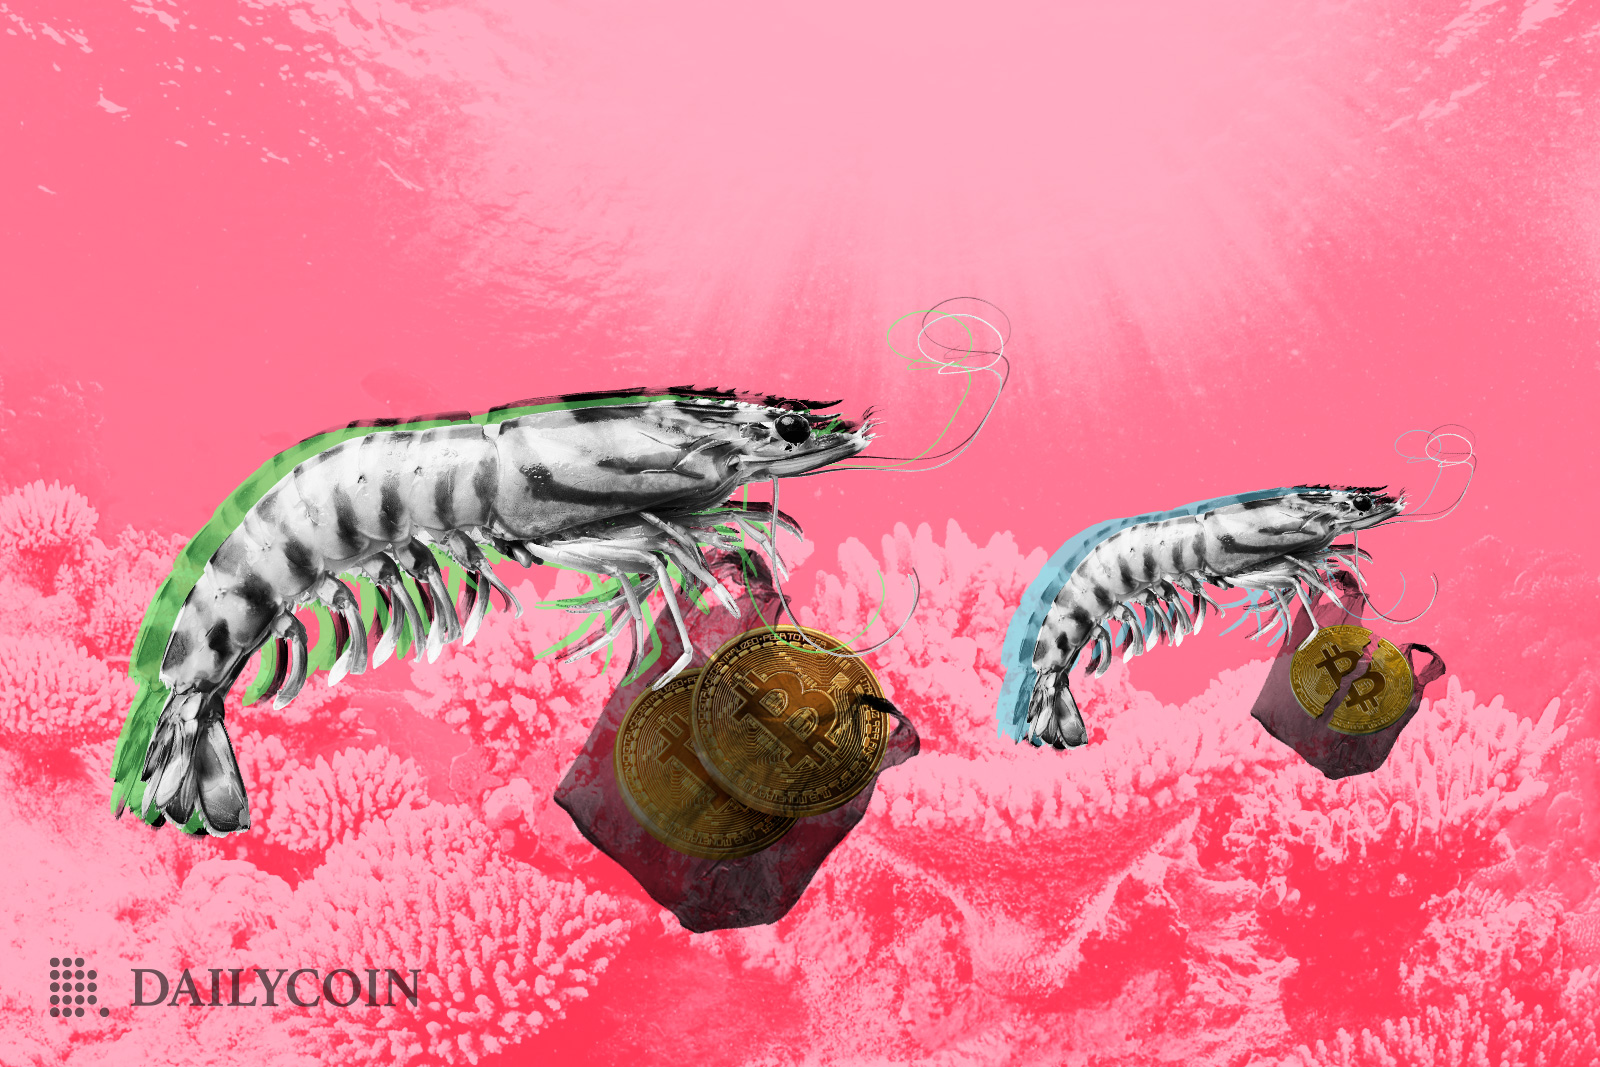 Tiger shrimps at pink ocean above pink corals are carrying brown bags of bitcoin